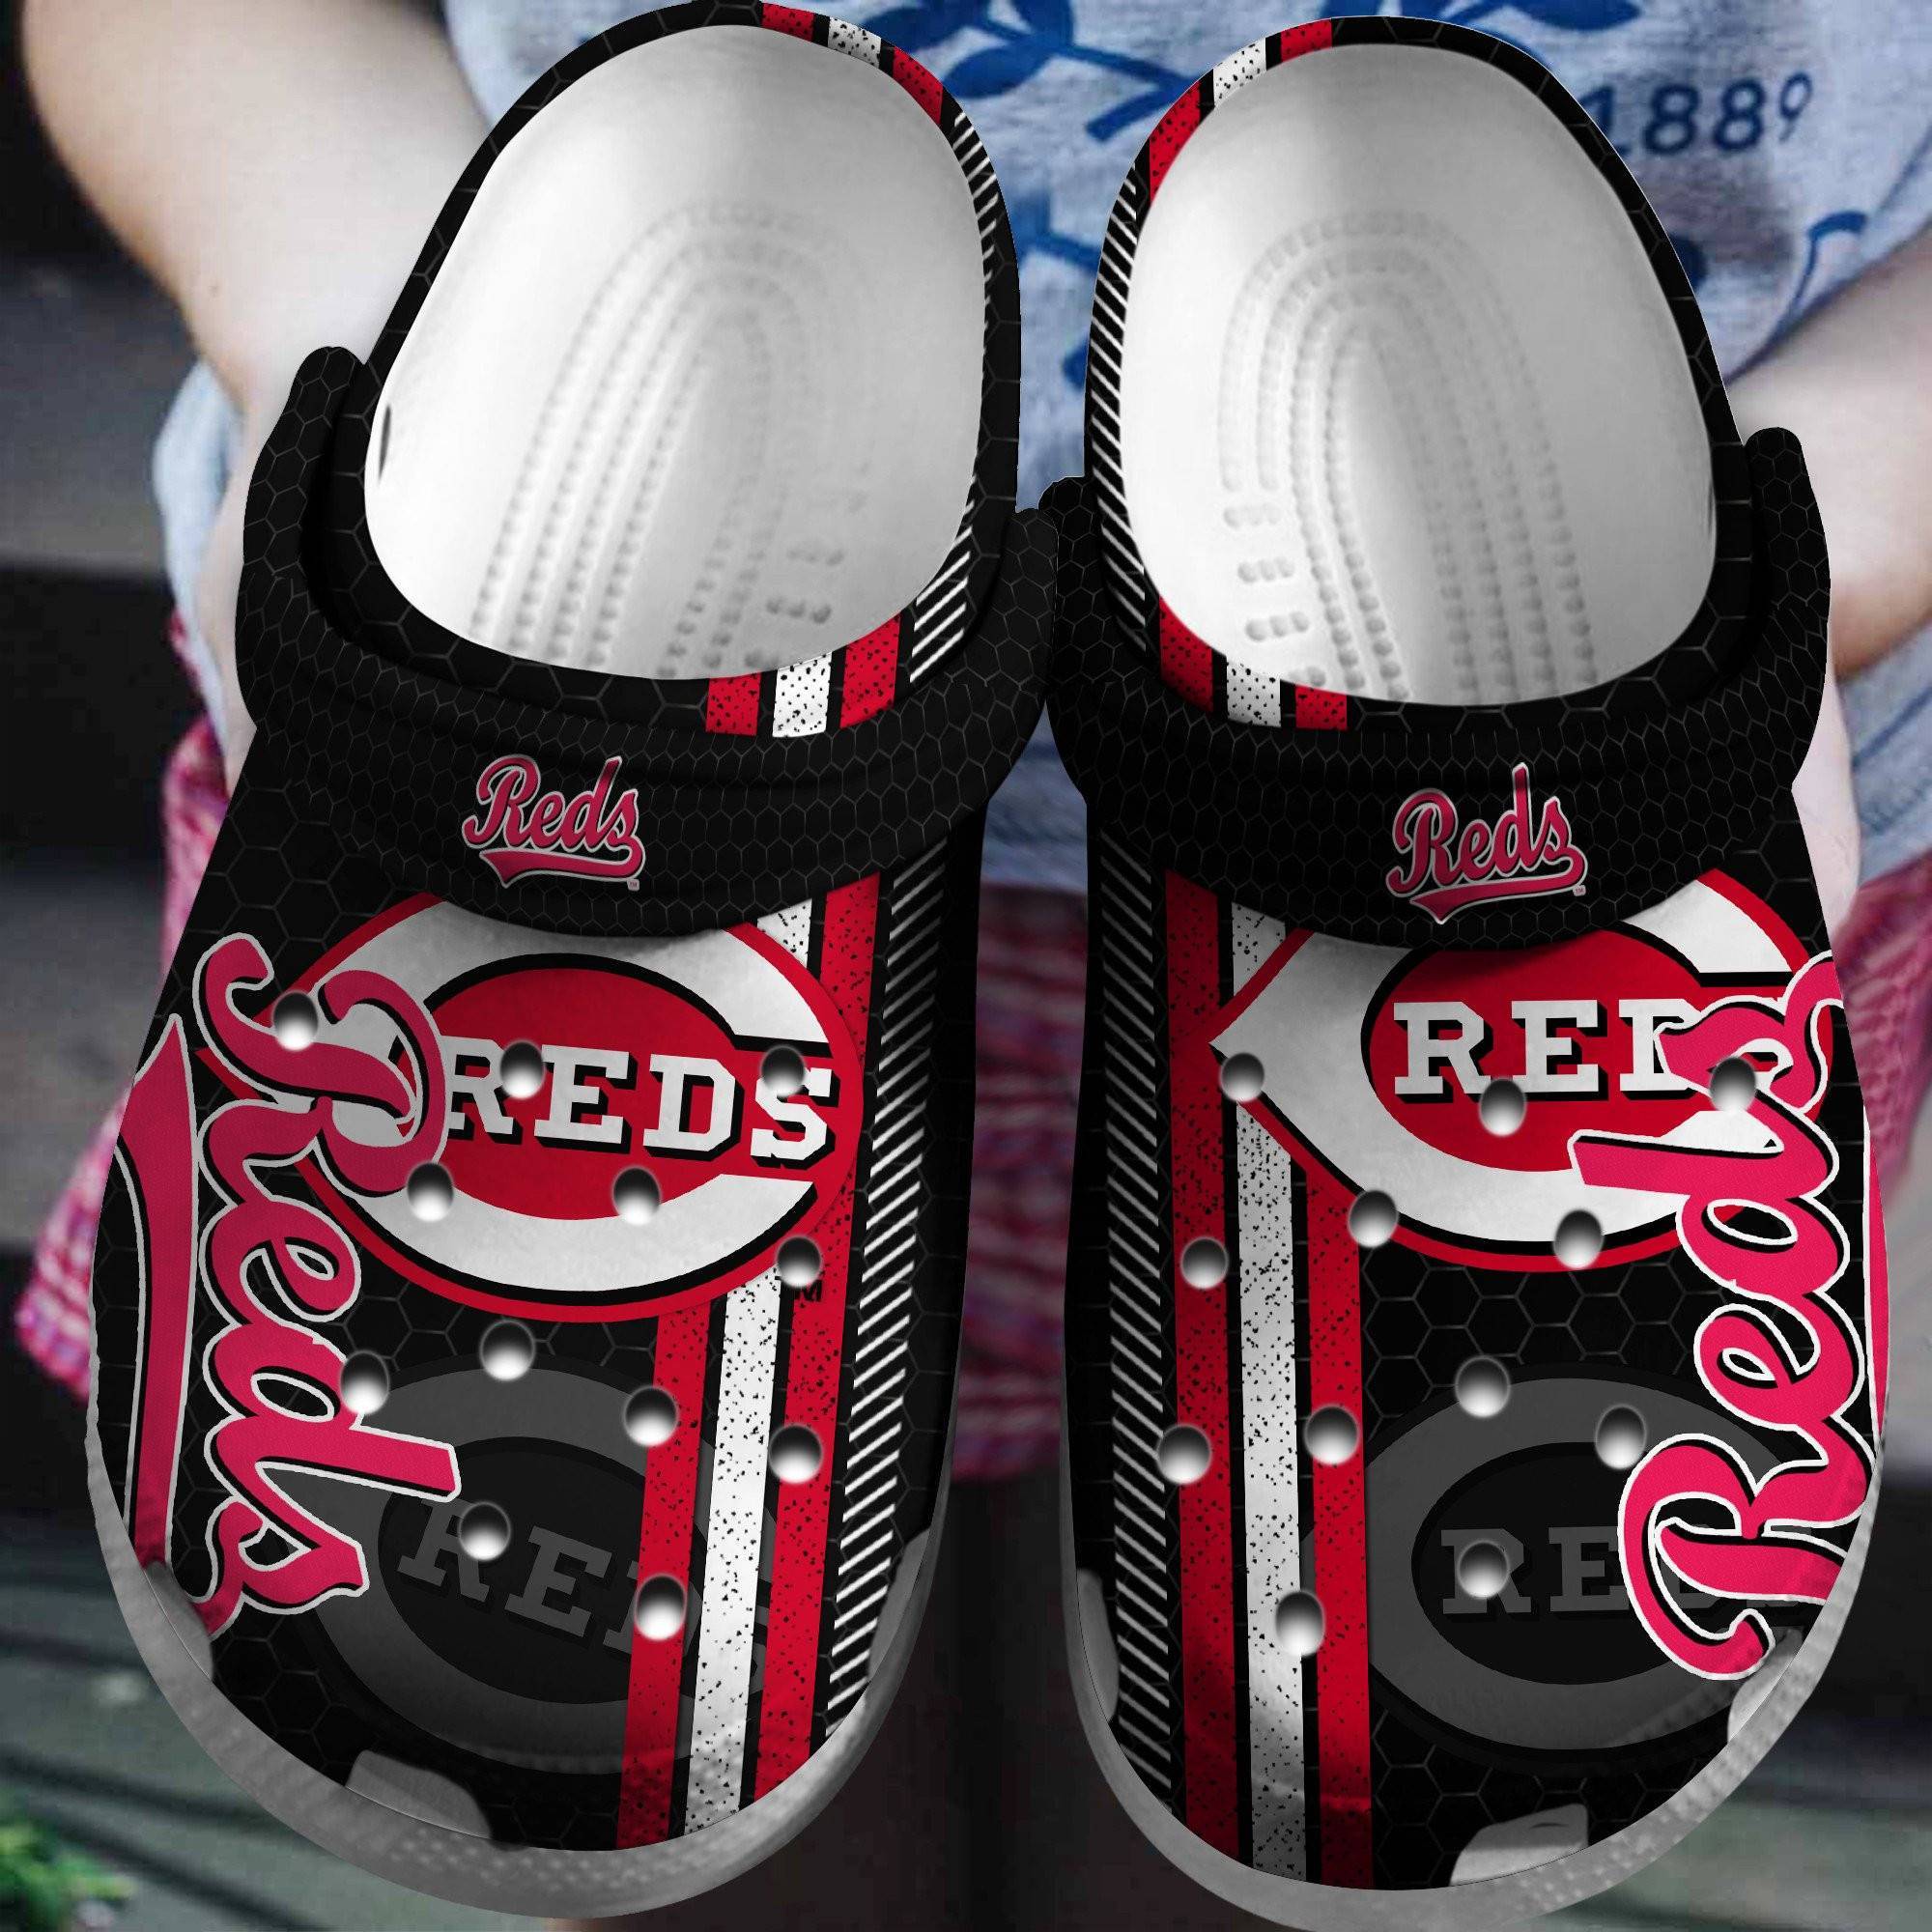 Hot Mlb Team Cincinnati Reds Crocss Clog Shoesshoes Trusted Shopping Online In The World